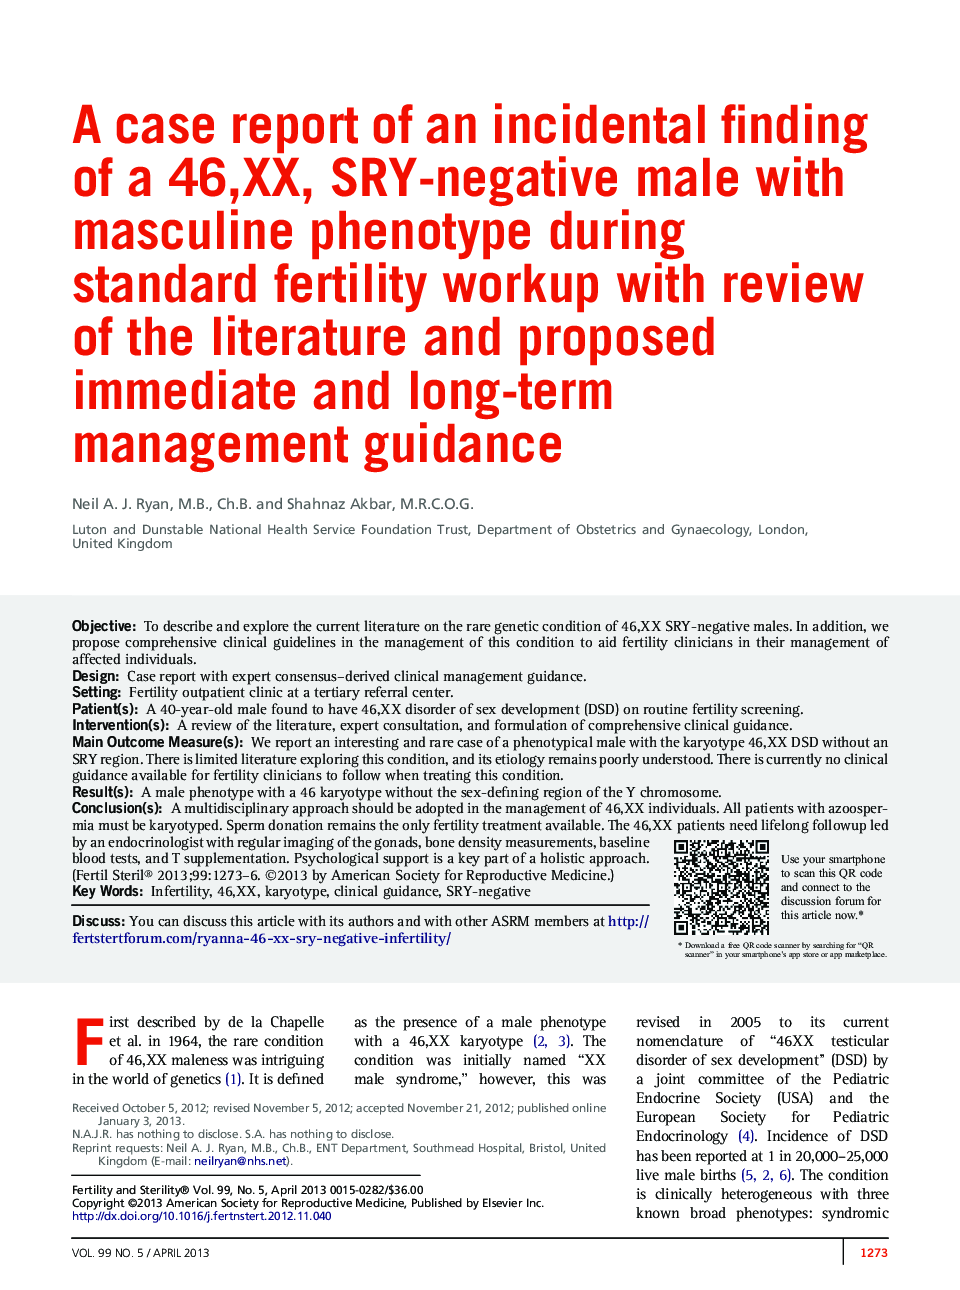 A case report of an incidental finding of a 46,XX, SRY-negative male with masculine phenotype during standard fertility workup with review of the literature and proposed immediate and long-term management guidance 